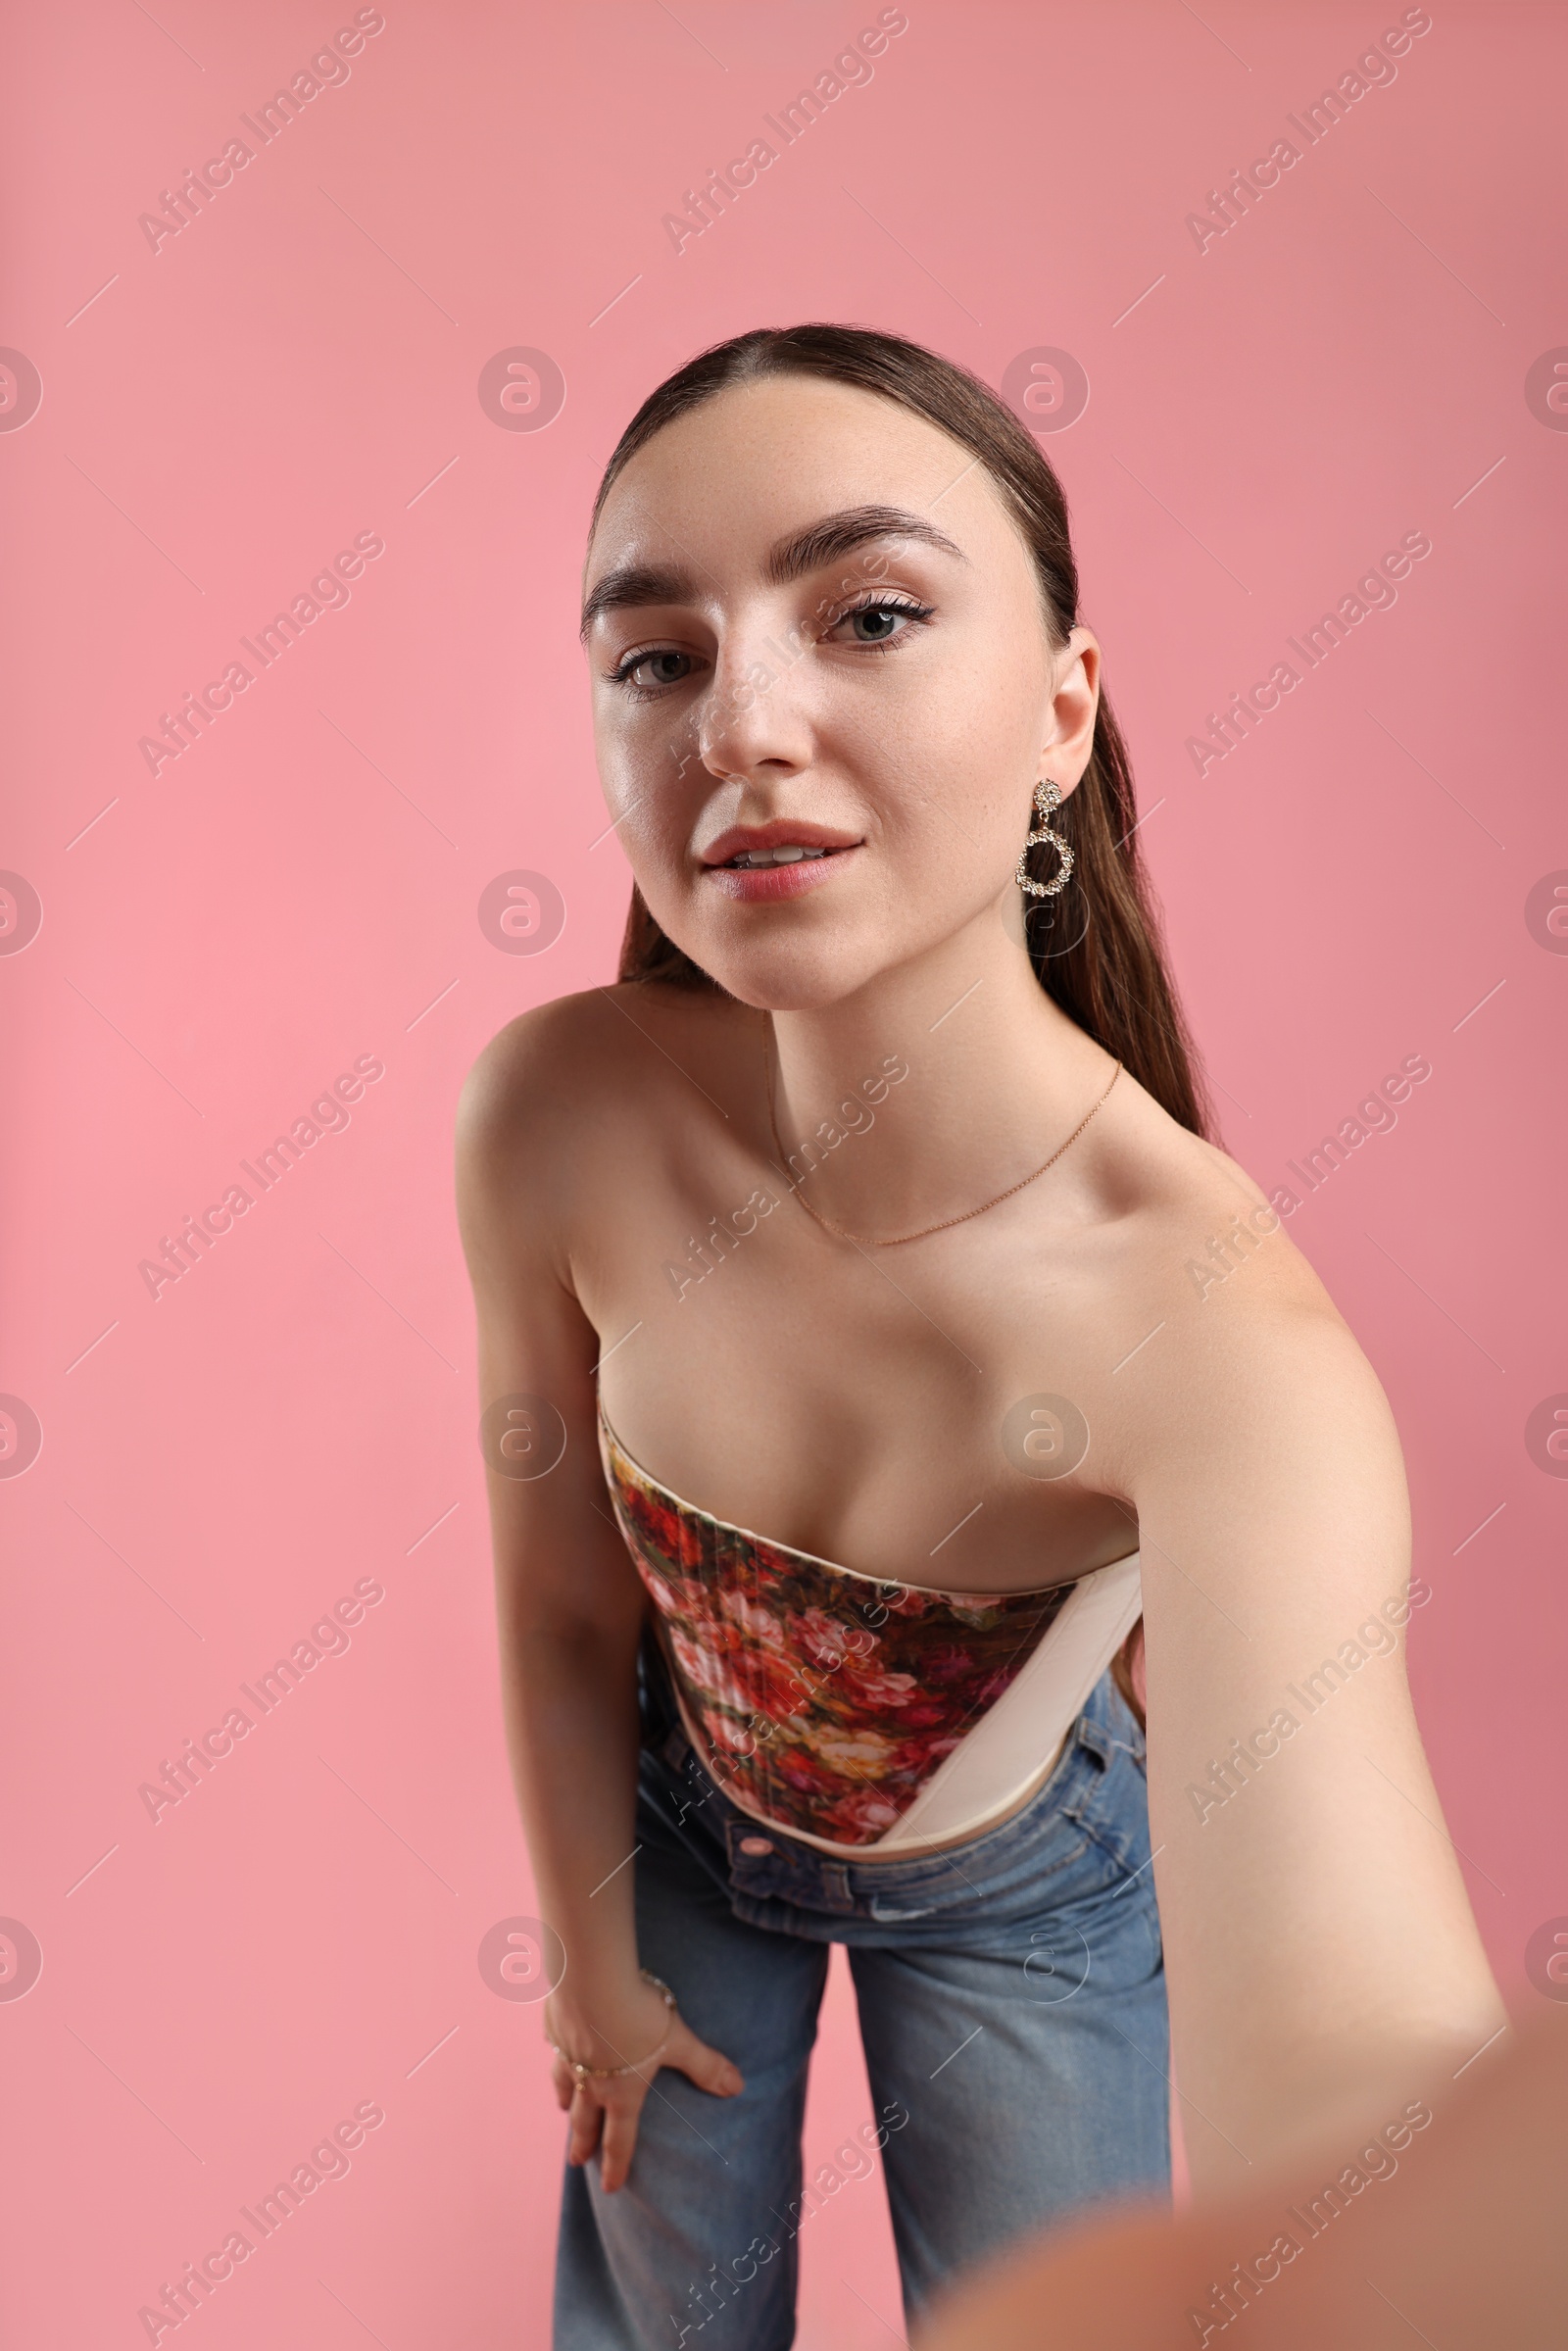 Photo of Smiling woman in stylish corset taking selfie on pink background